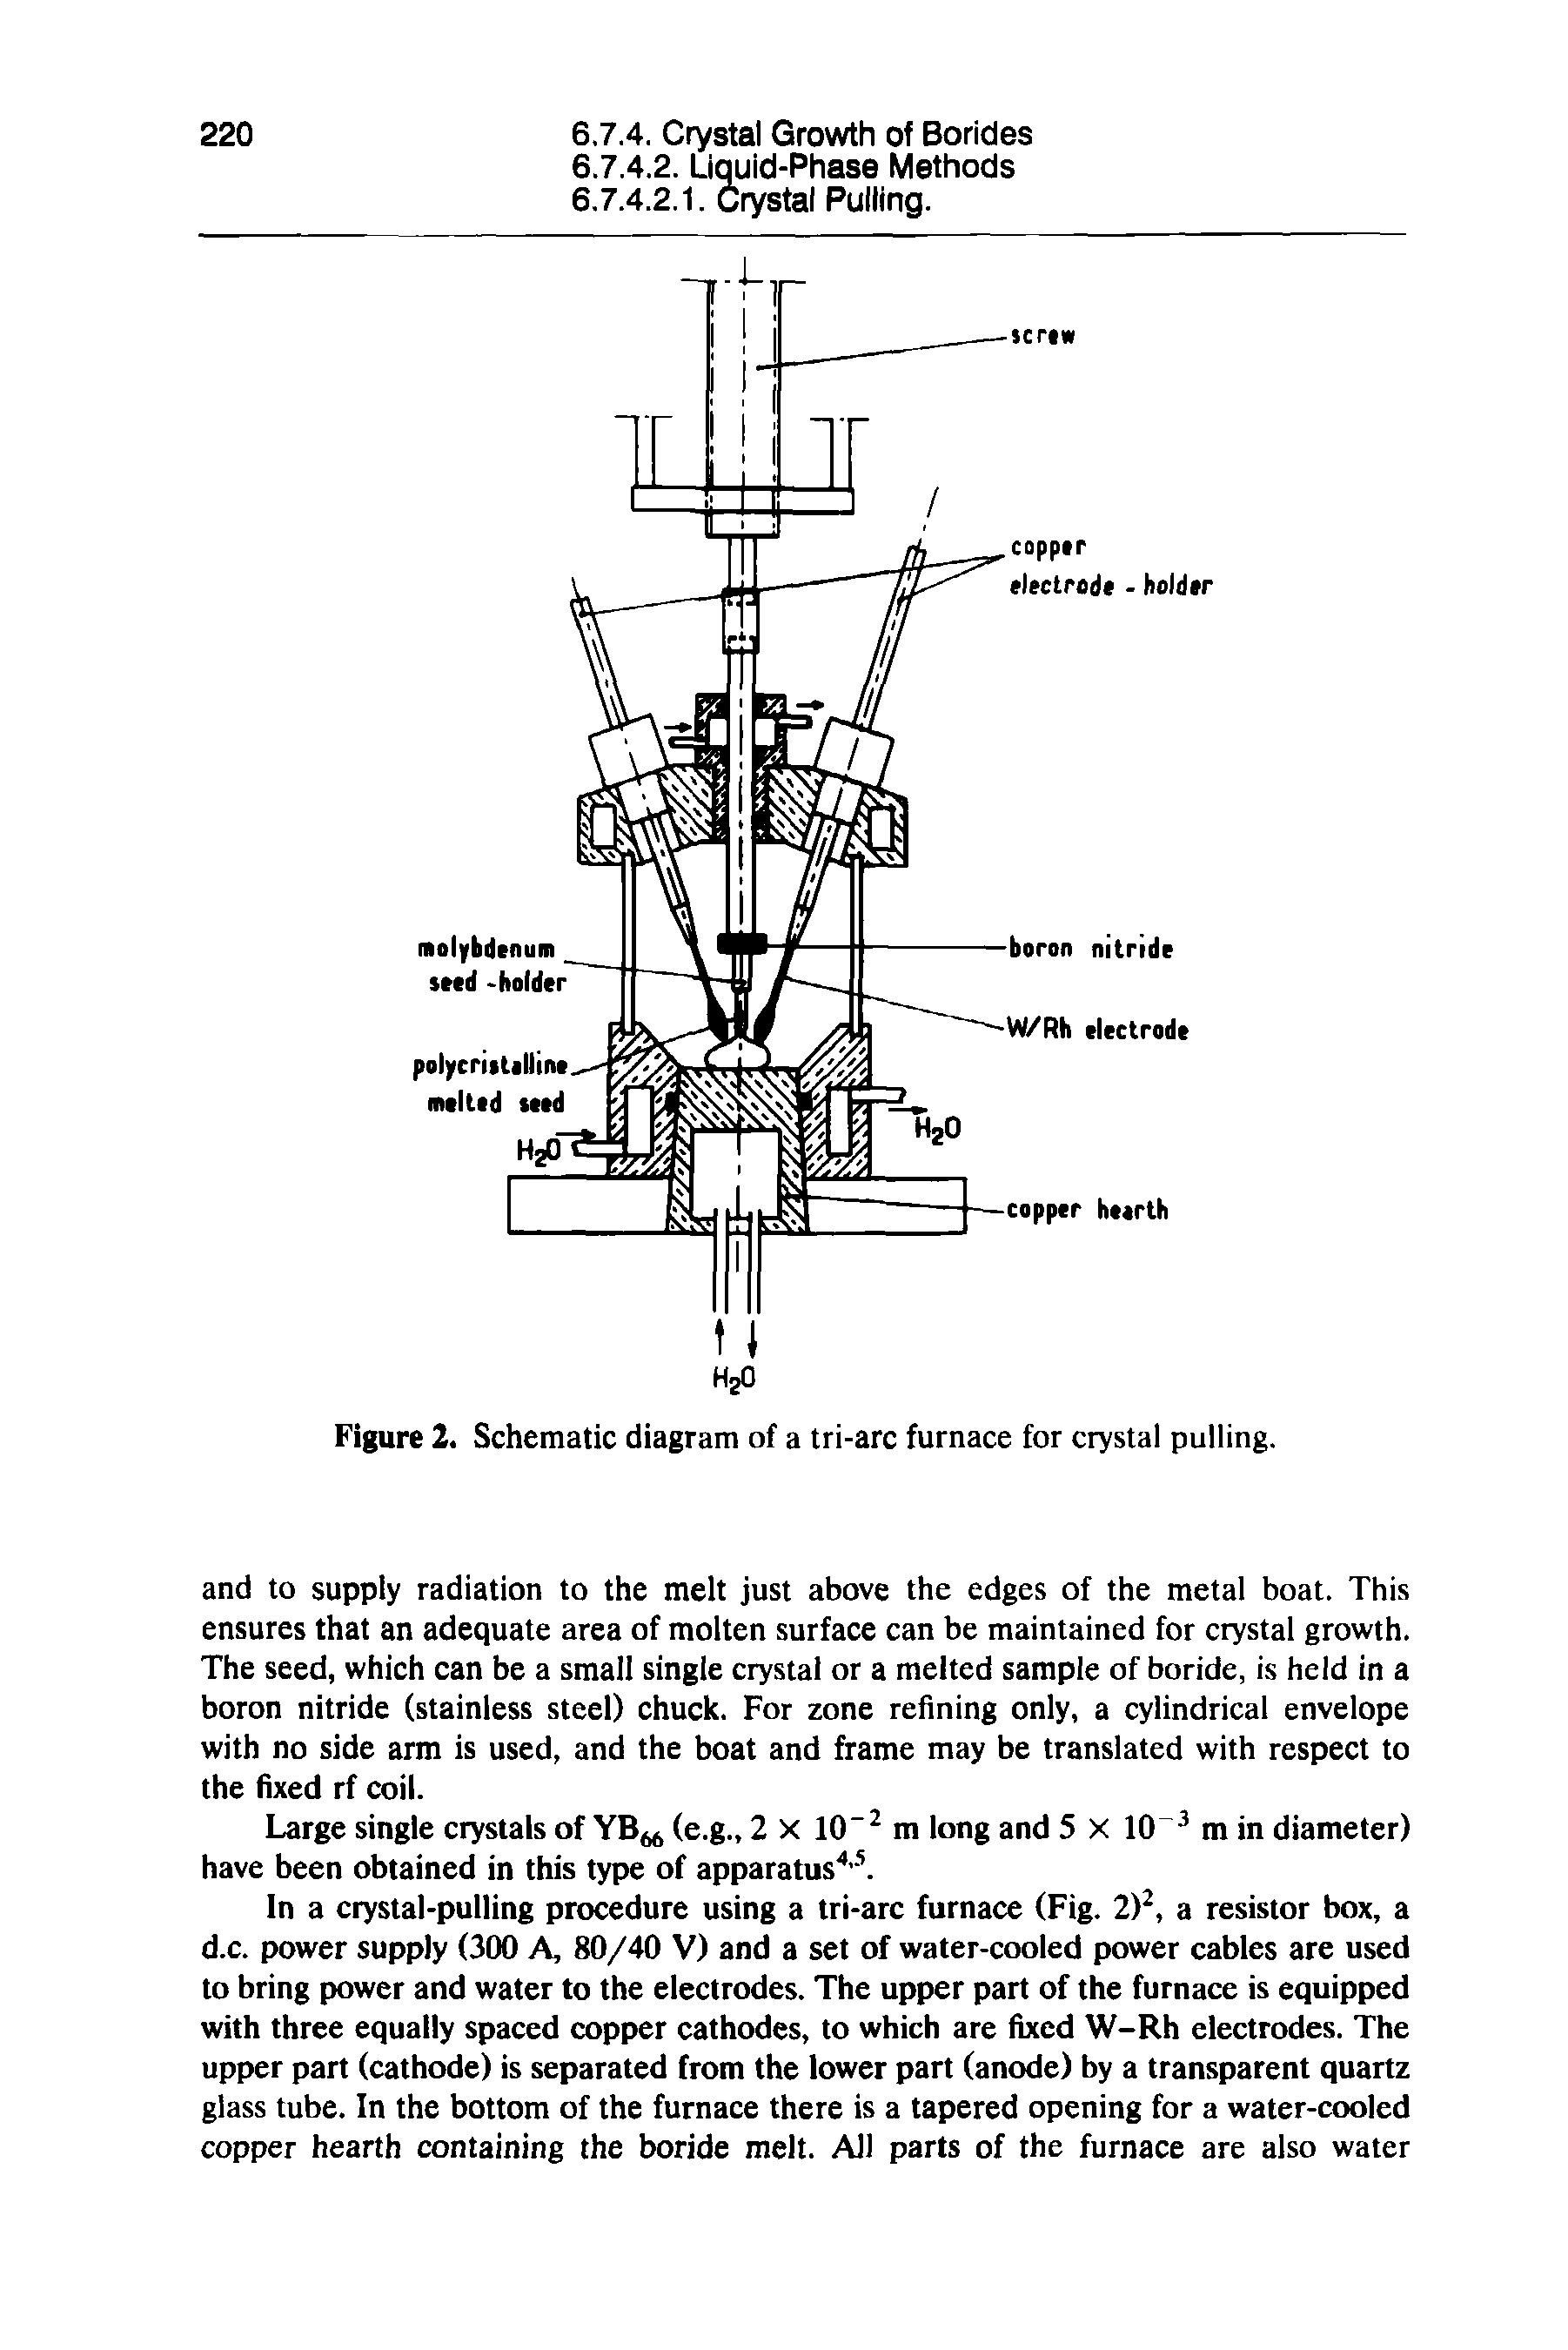 Figure 2. Schematic diagram of a tri-arc furnace for crystal pulling.